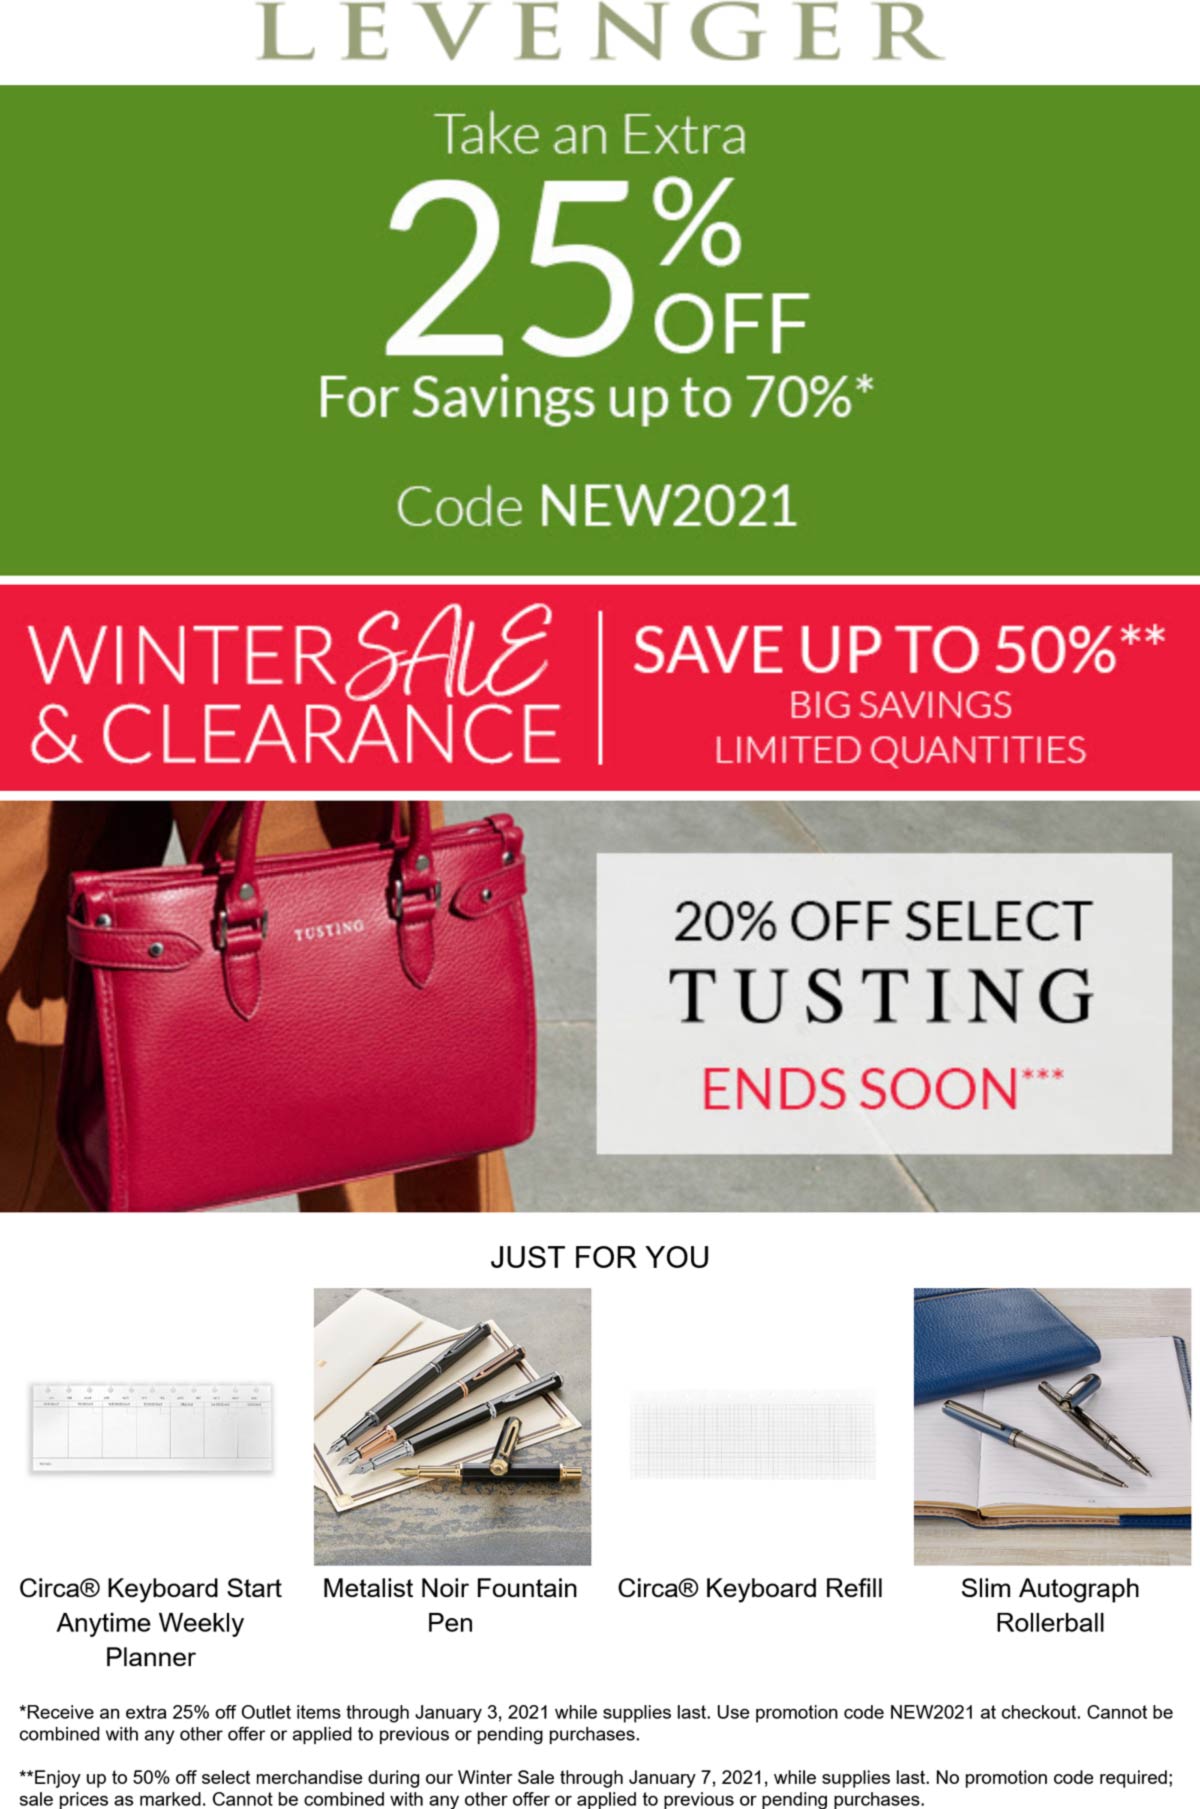 Levenger stores Coupon  Extra 25% off at Levenger via promo code NEW2021 #levenger 